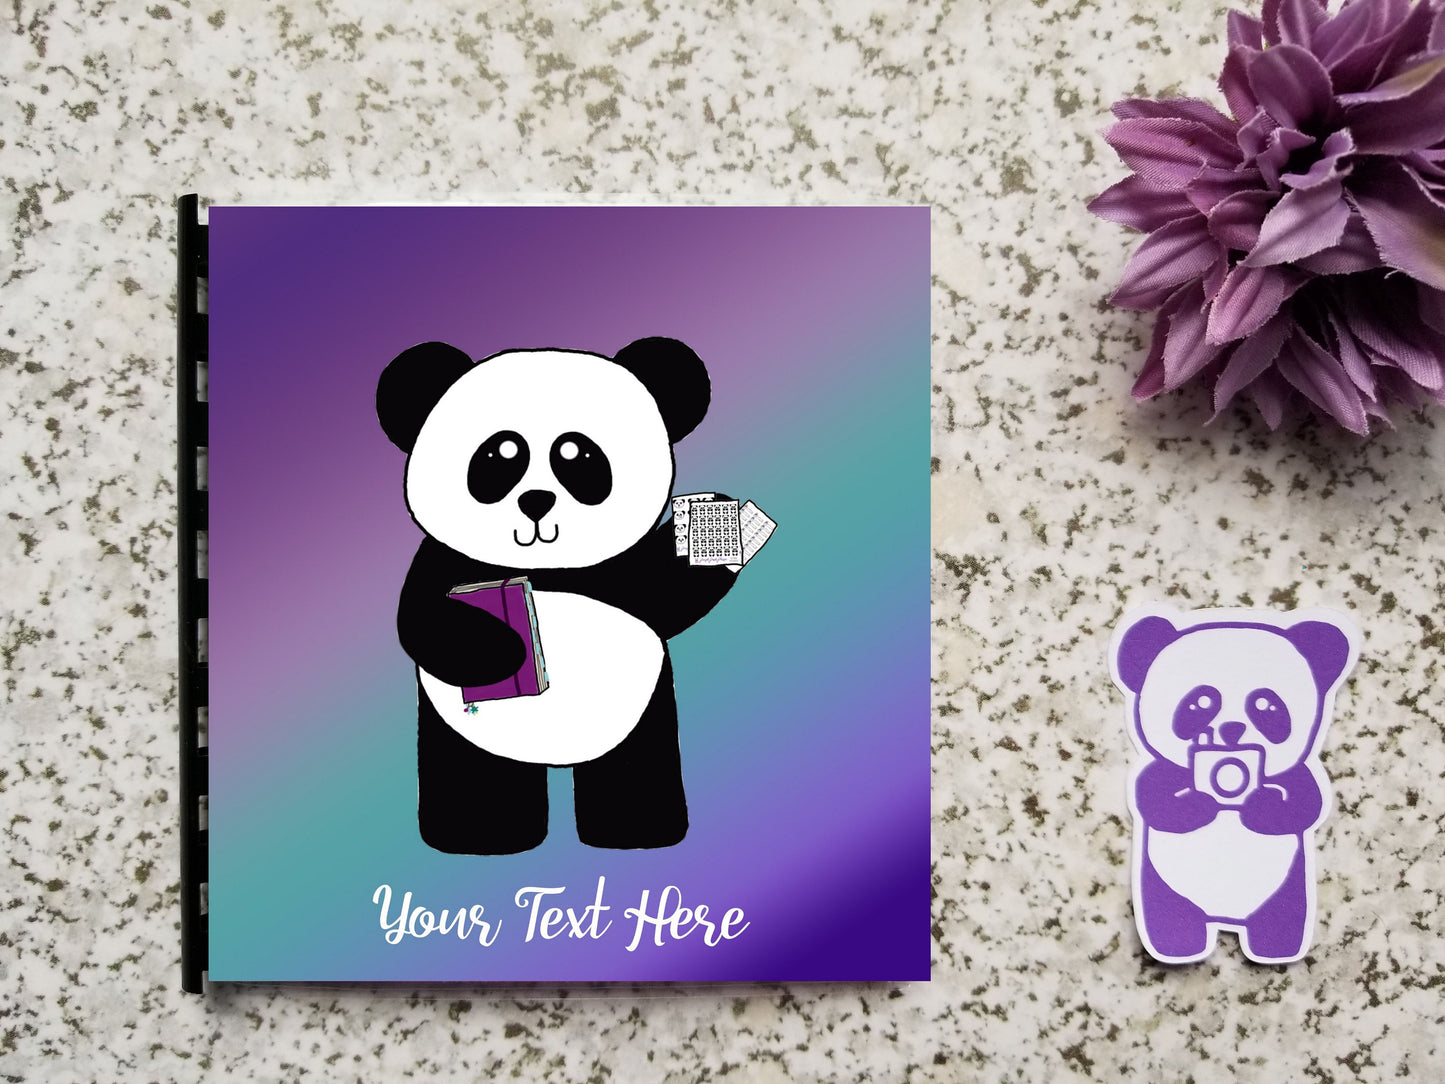 Personalized Text Reusable Sticker Storage Book Album - Purple Teal Ombre Gradient Panda Ready to Plan Hand Drawn Cover